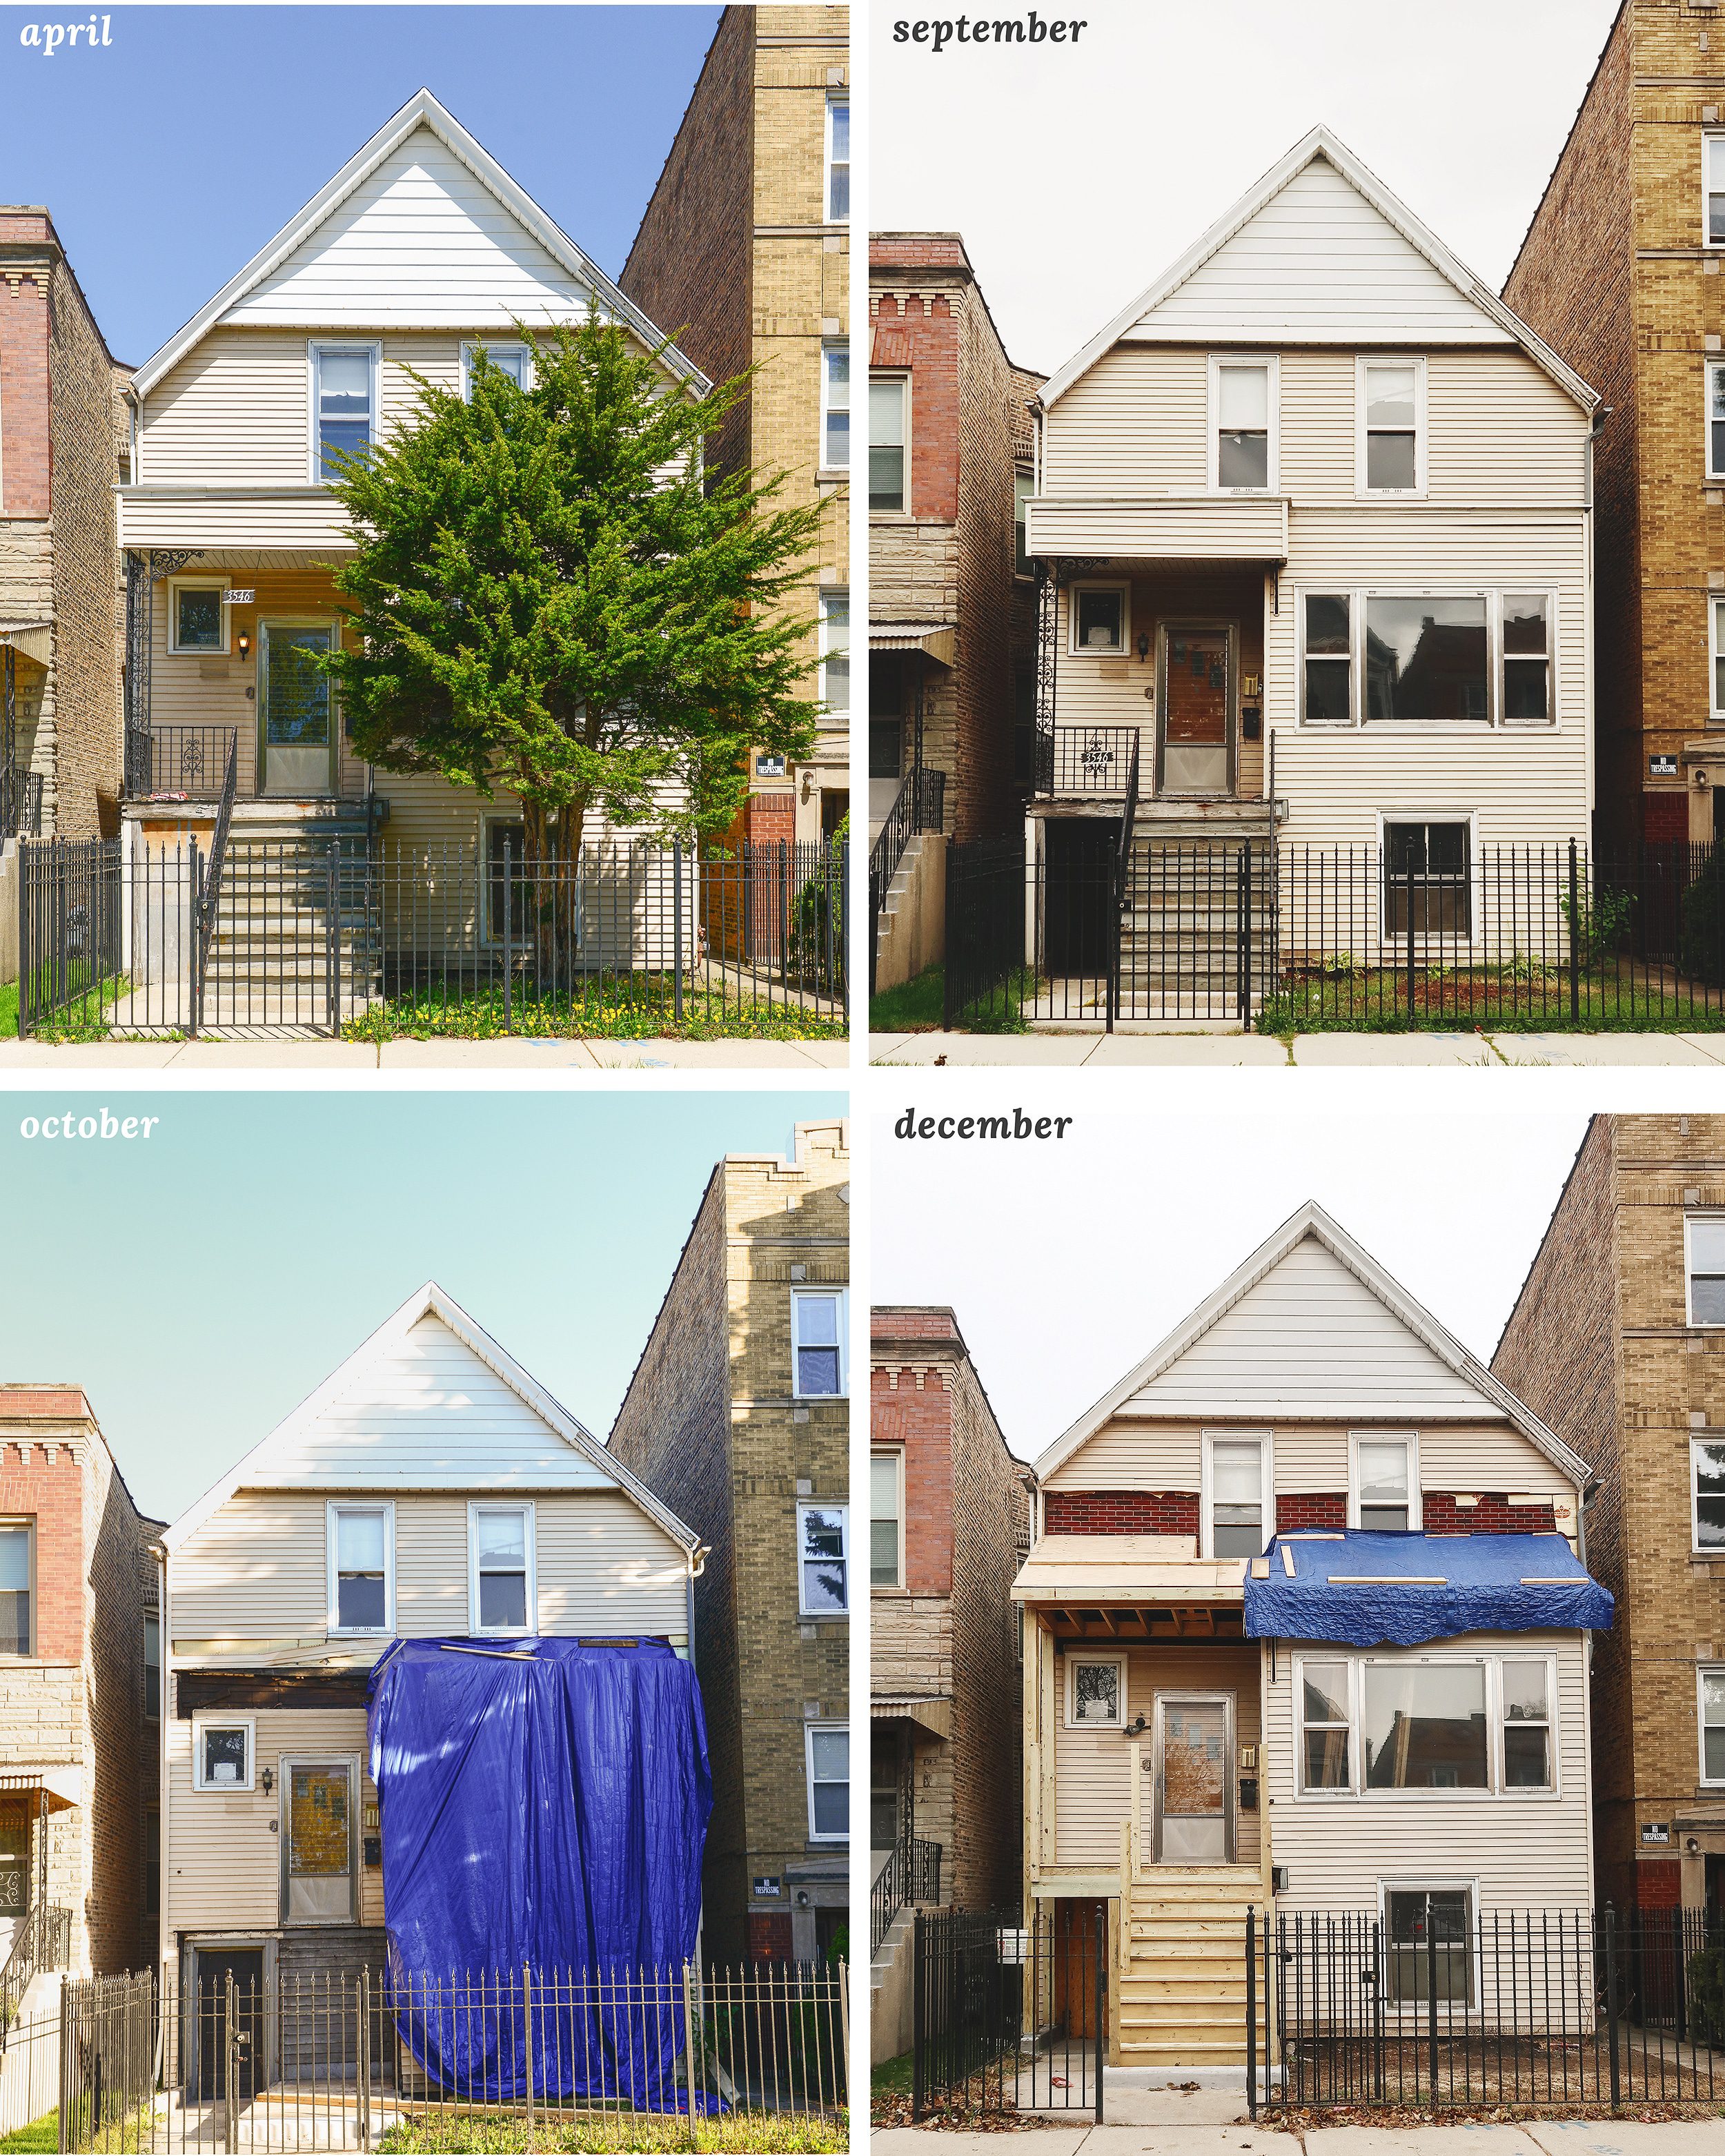 A composite of four images showing progress to the front of a framed chicago two flat building from April, September, October and December, via Yellow Brick Home